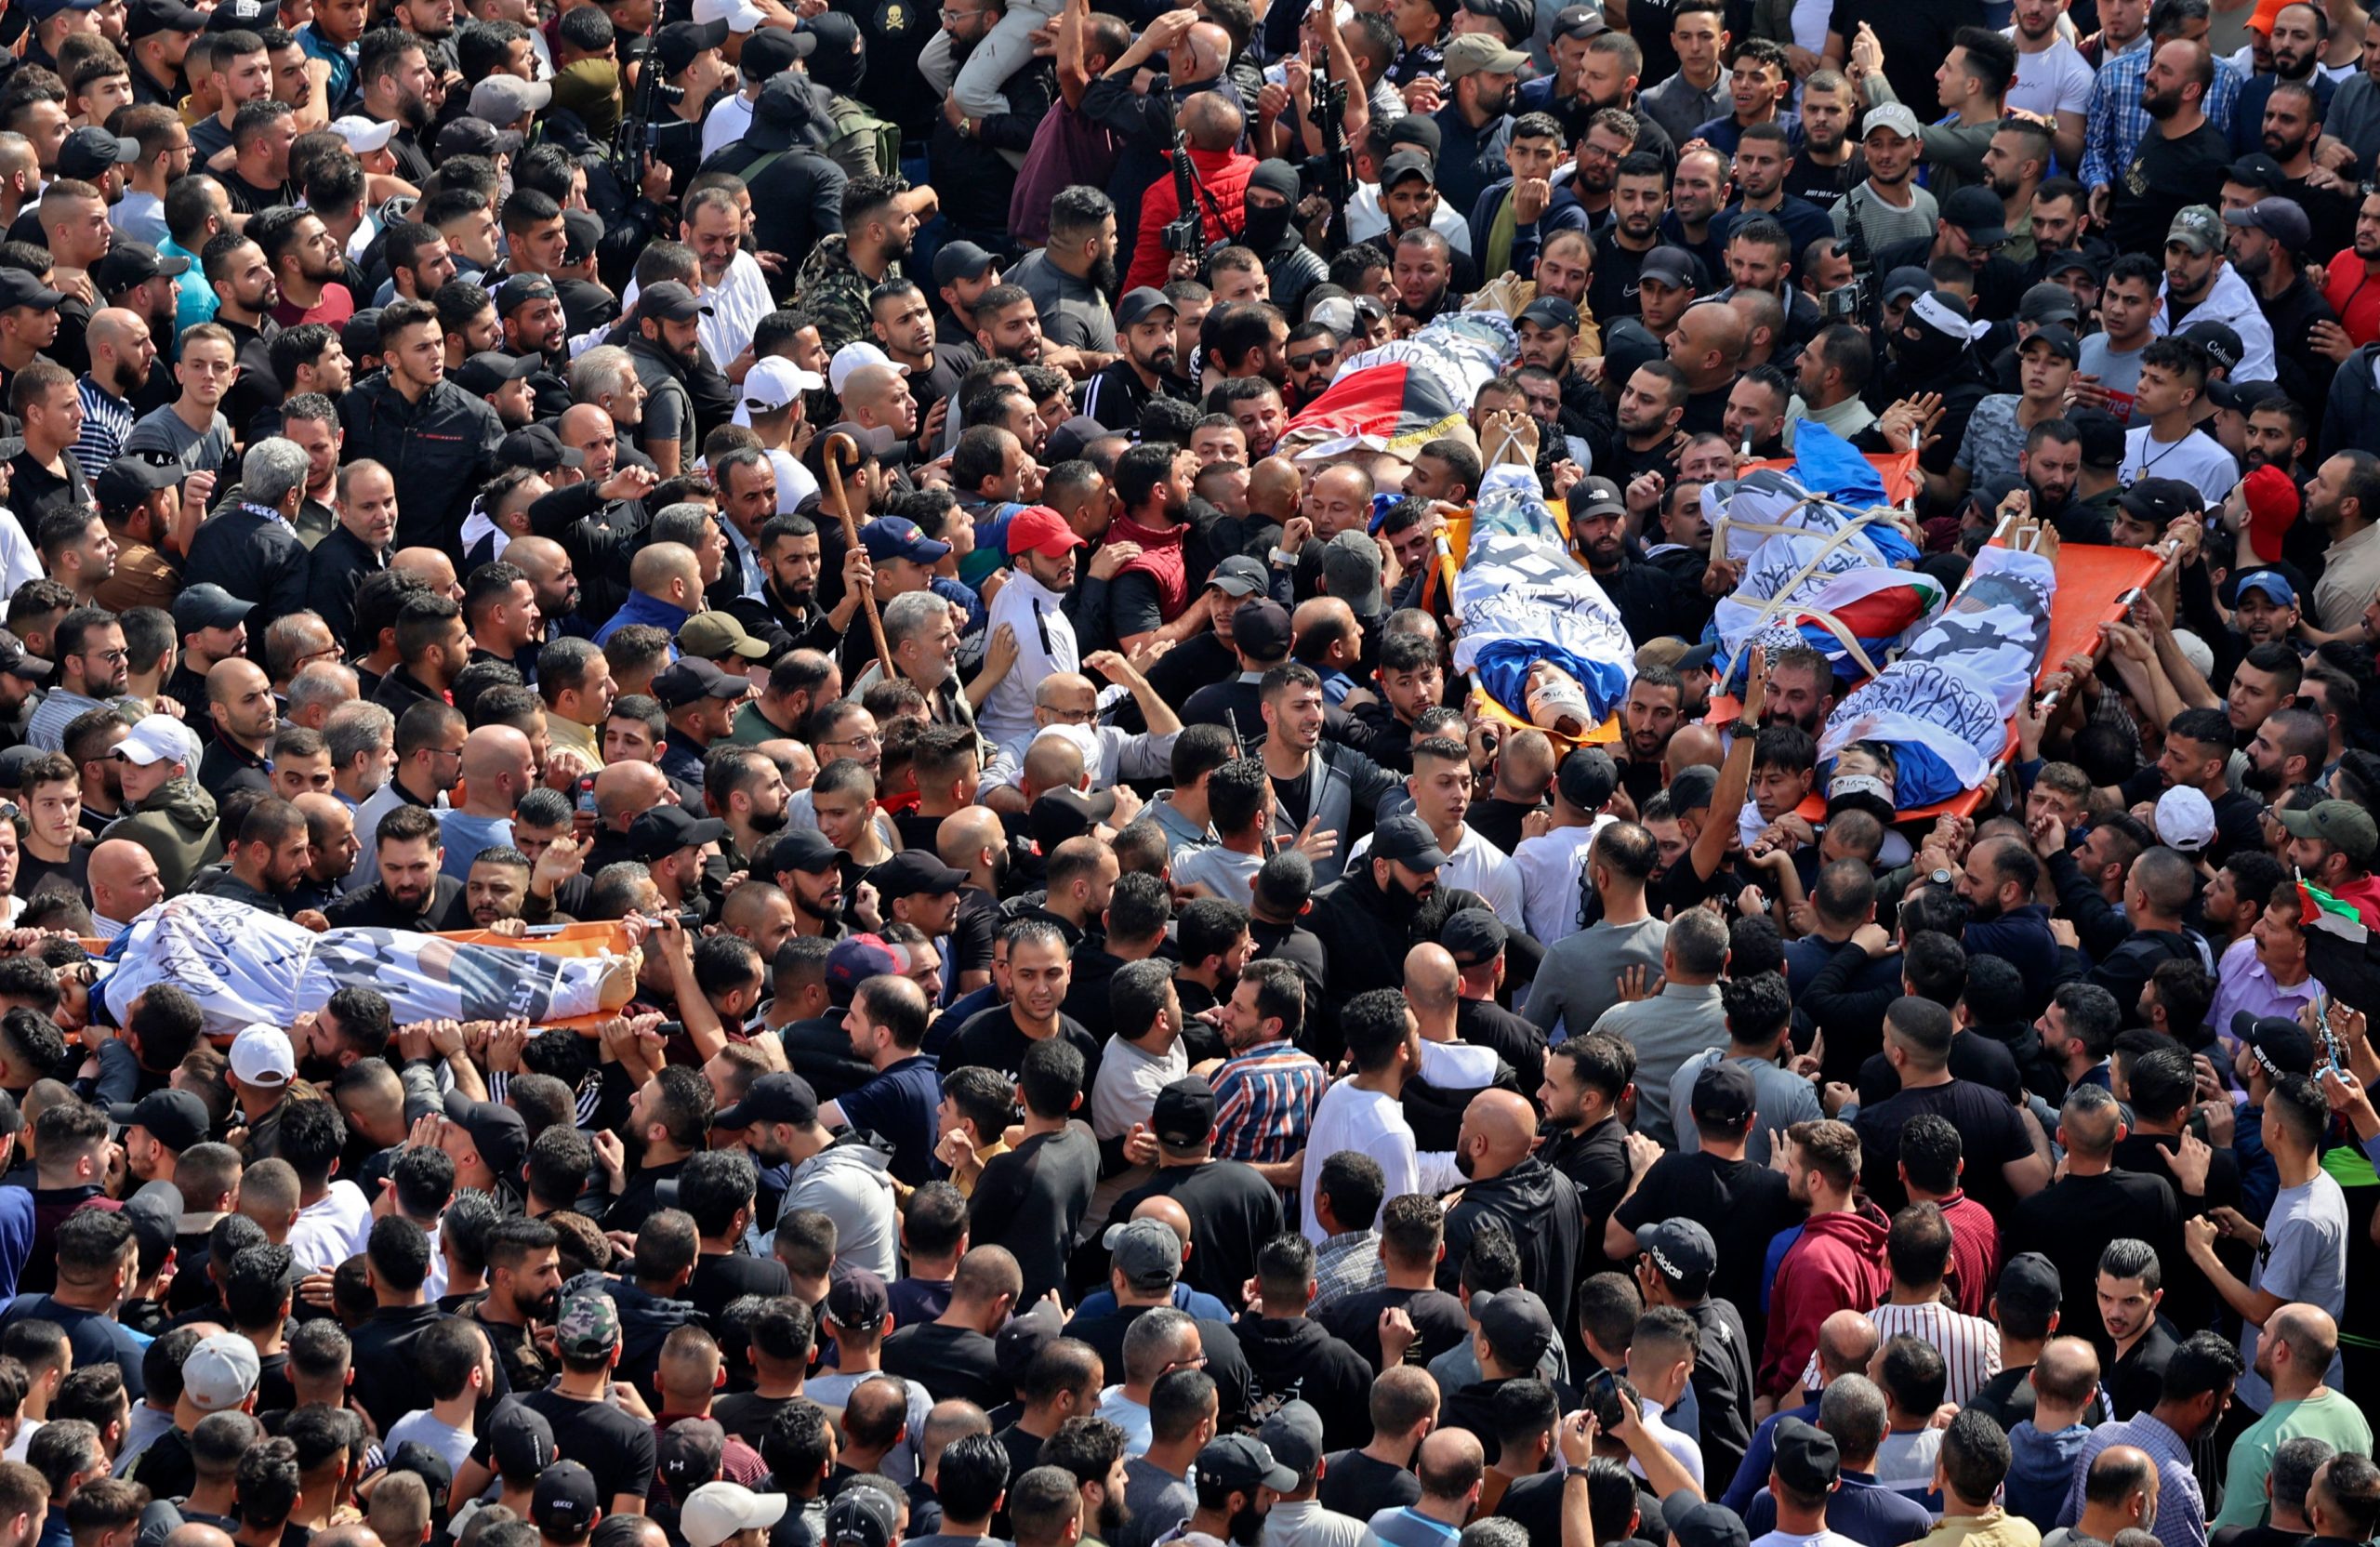 Mourners attend the funeral of Palestinians killed in an overnight Israeli raid, in the occupied West Bank city of Nablus on October 25, 2022. - Six Palestinians were killed in sweeping Israeli raids in the occupied West Bank, the Palestinian Health Ministry reported, in what the army said was an assault targeting the emerging "Lion's Den" armed group. 